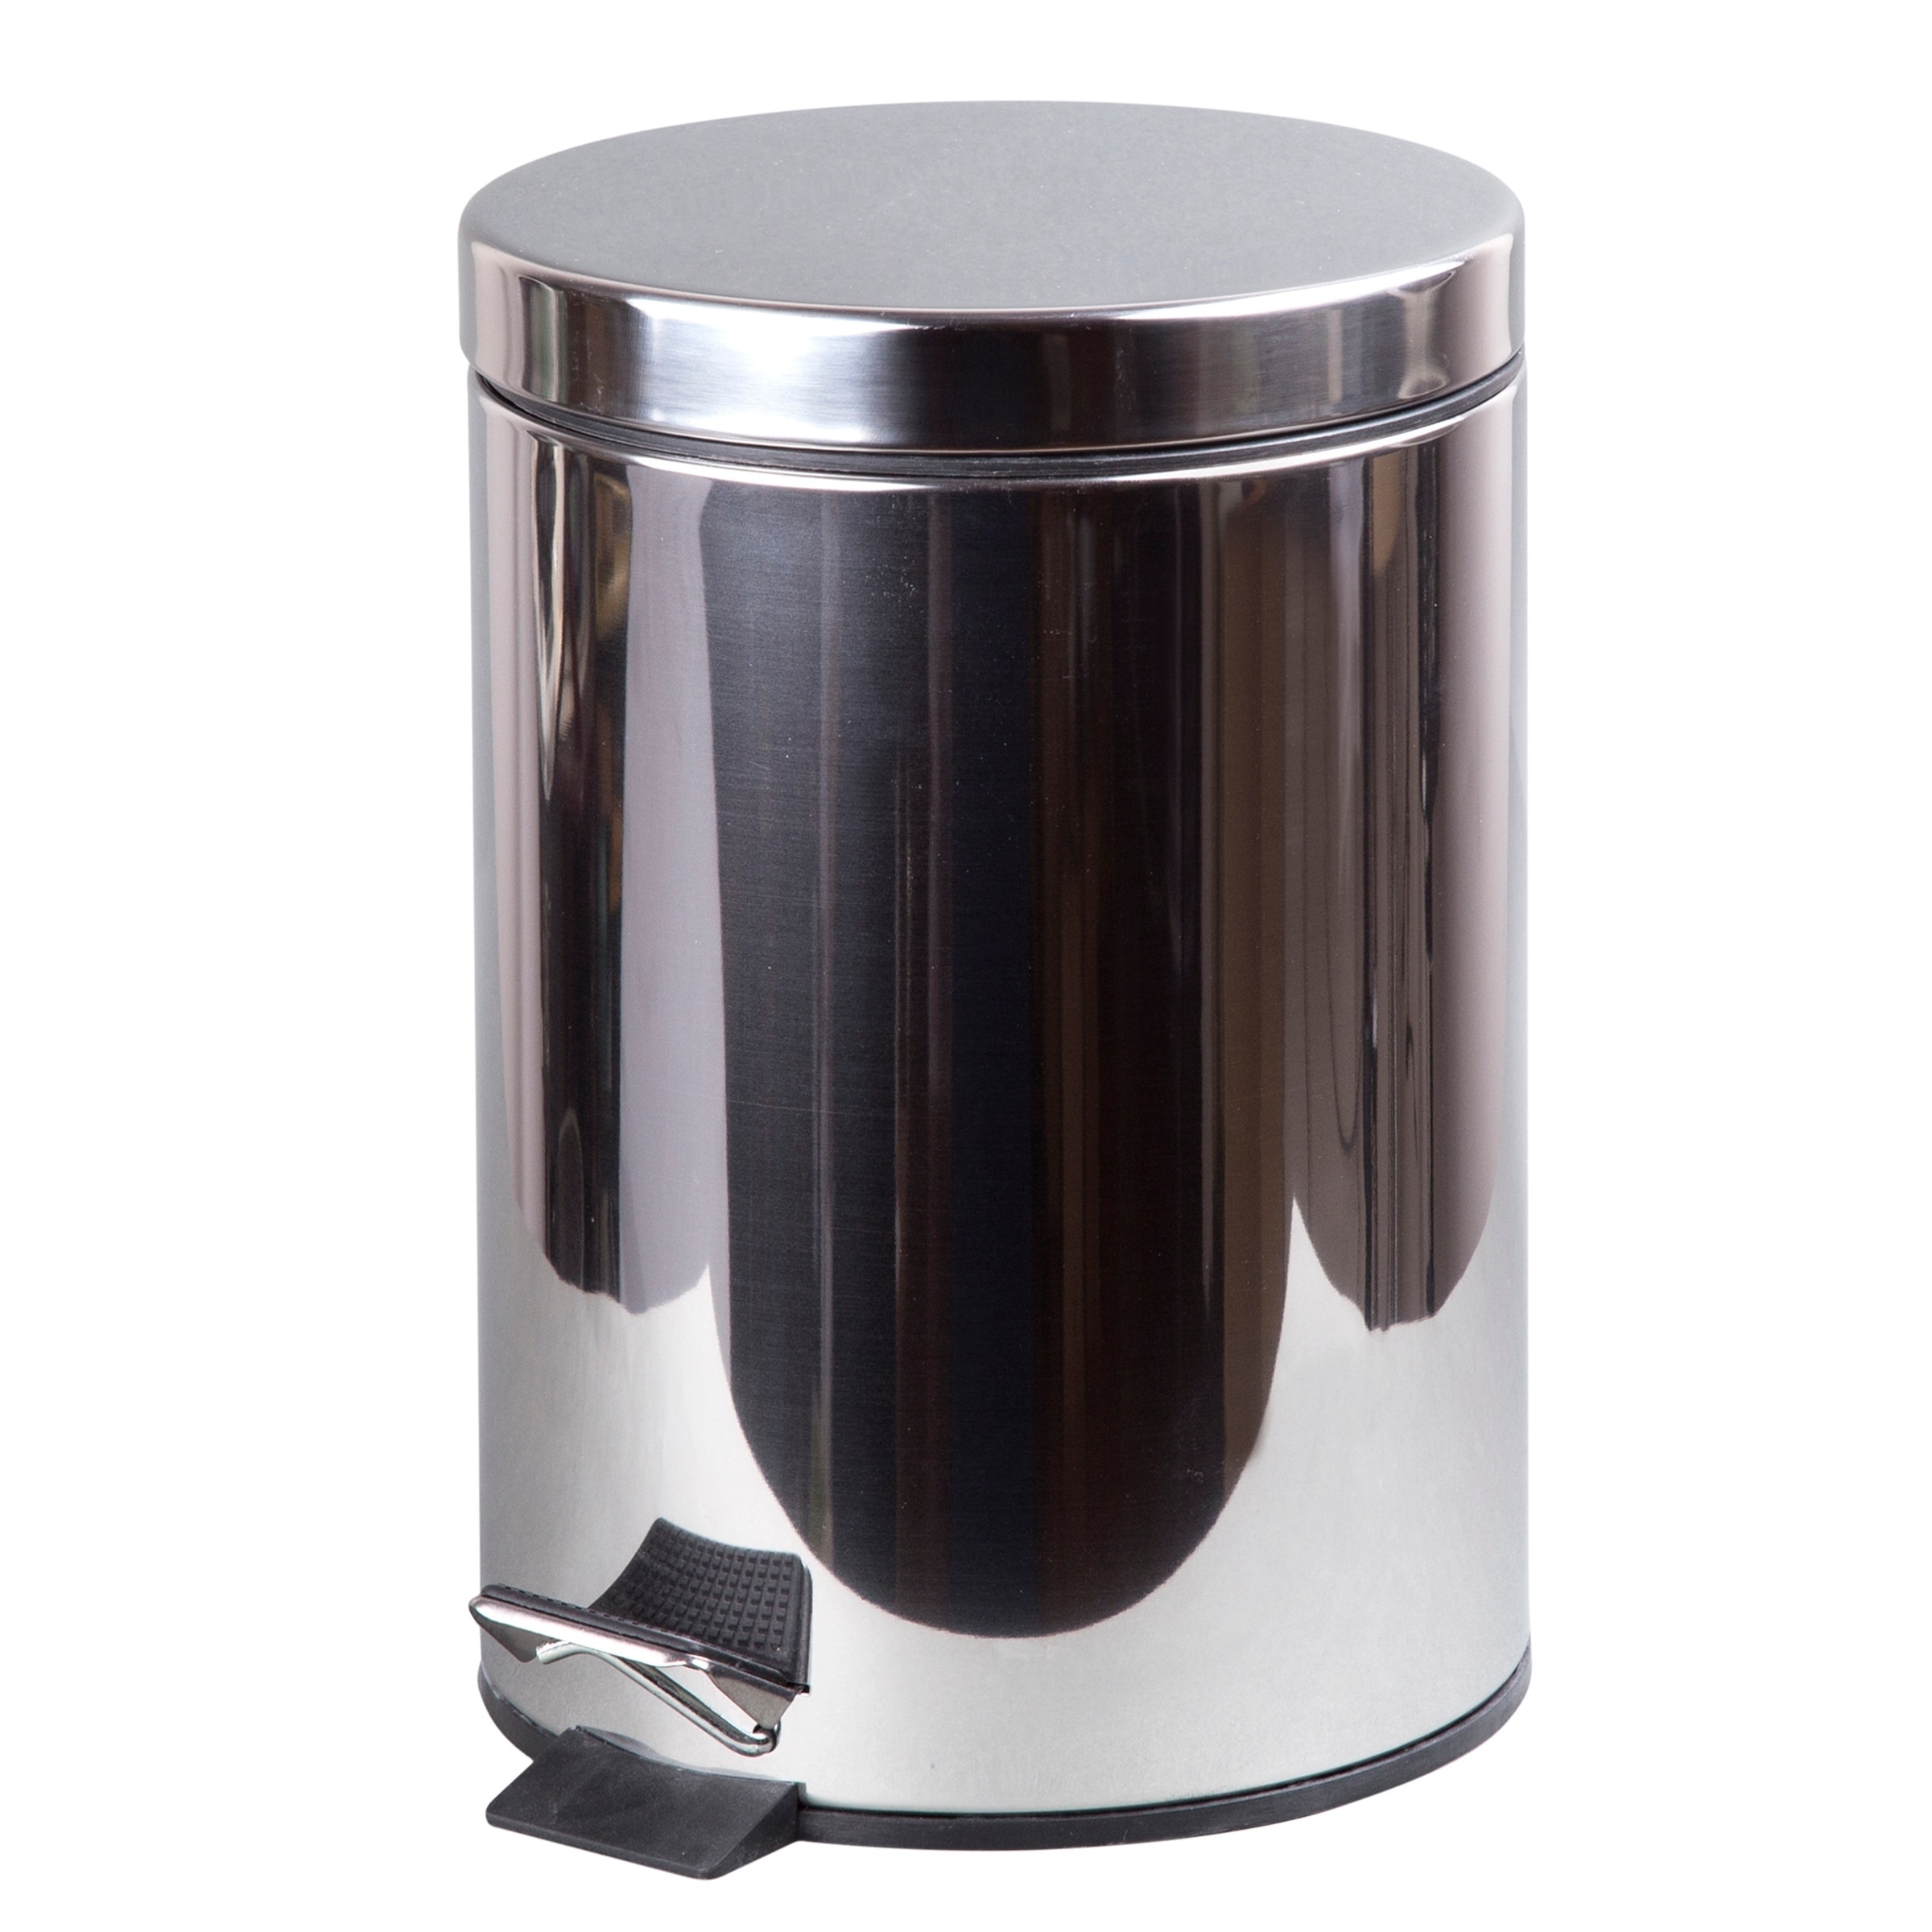 https://ak1.ostkcdn.com/images/products/30608436/Creative-Home-5-Liter-1.3-Gallon-Round-Step-On-Trash-Can-5-L-Stainless-Steel-Mirror-Finished-d9958a47-c7d9-446f-ac18-04a72930e56d.jpg